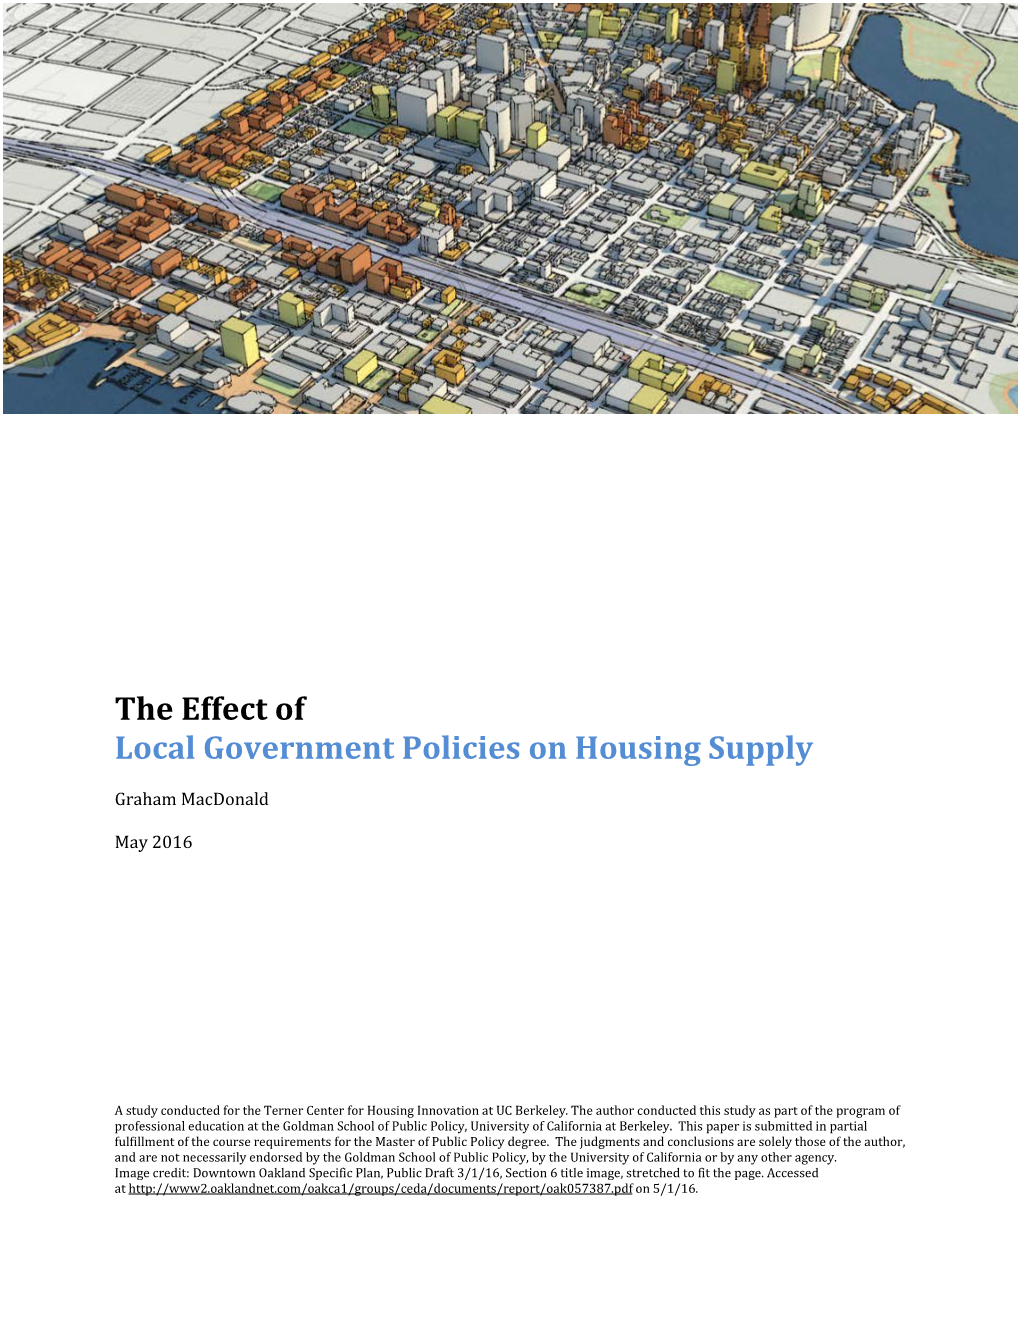 The Effect of Local Government Policies on Housing Supply